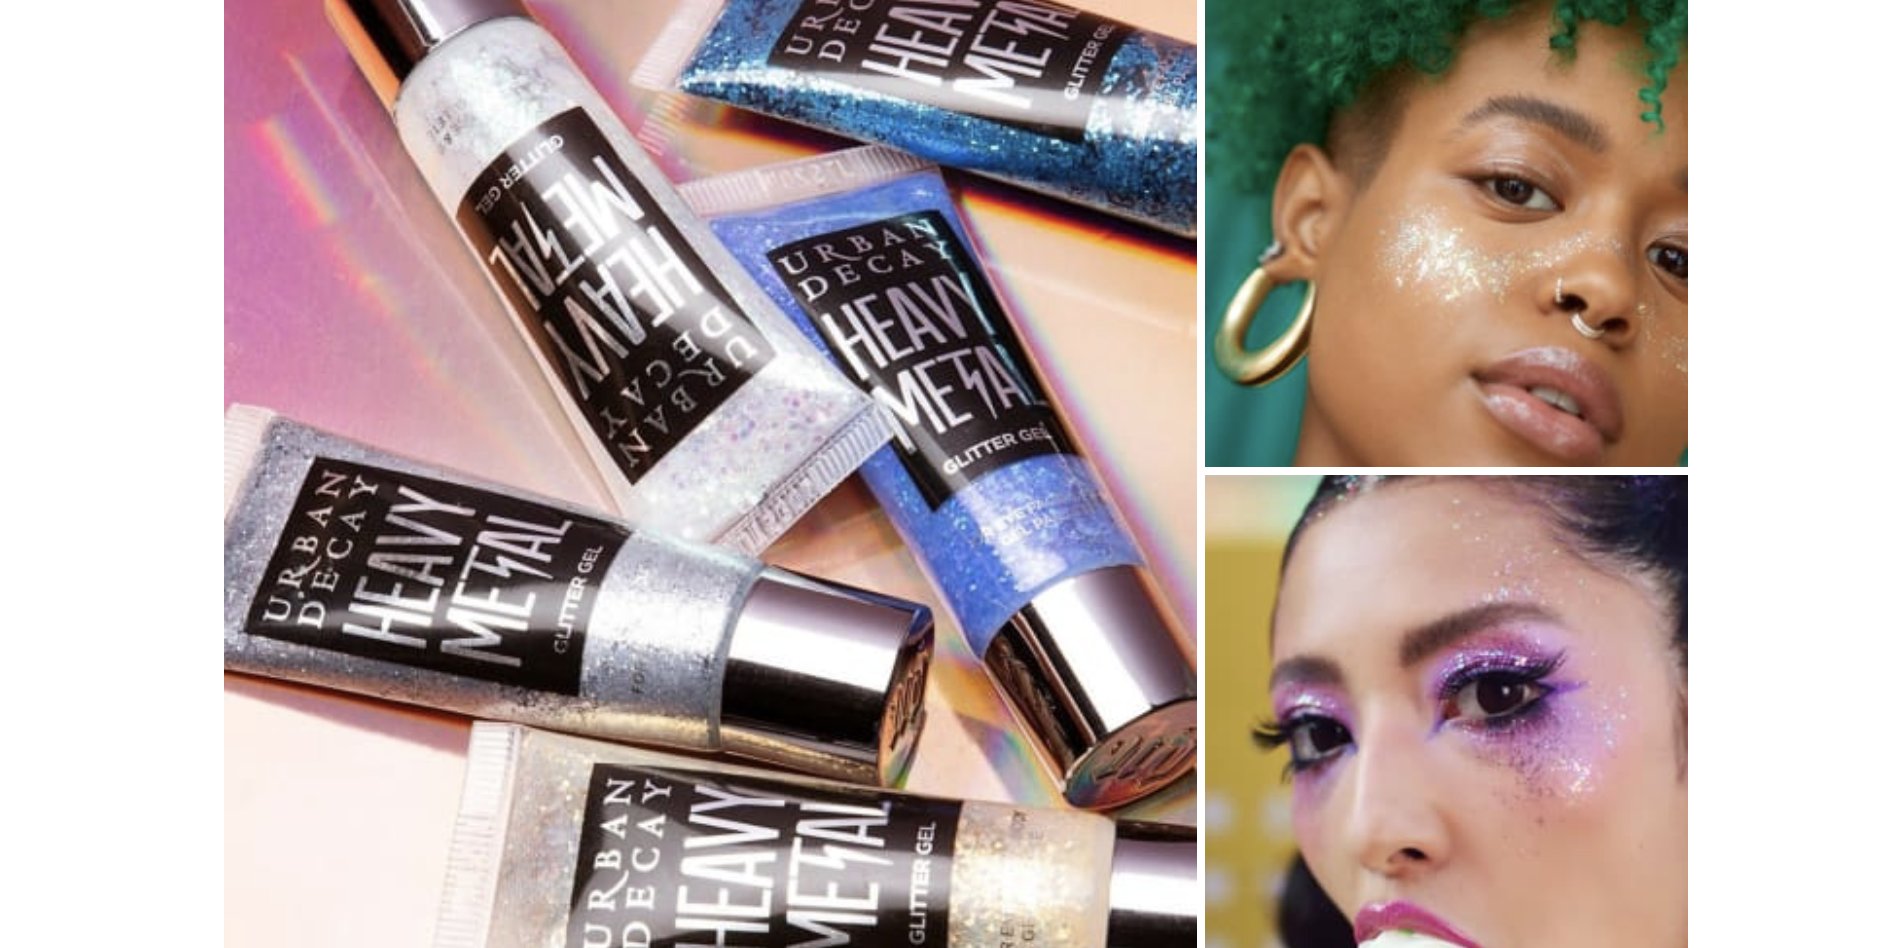 screen shot 2019 07 01 at 2 35 42 am e1561916275235.png?resize=1200,630 - 23 Beauty Products That Will Freshen Up Your Look And Day